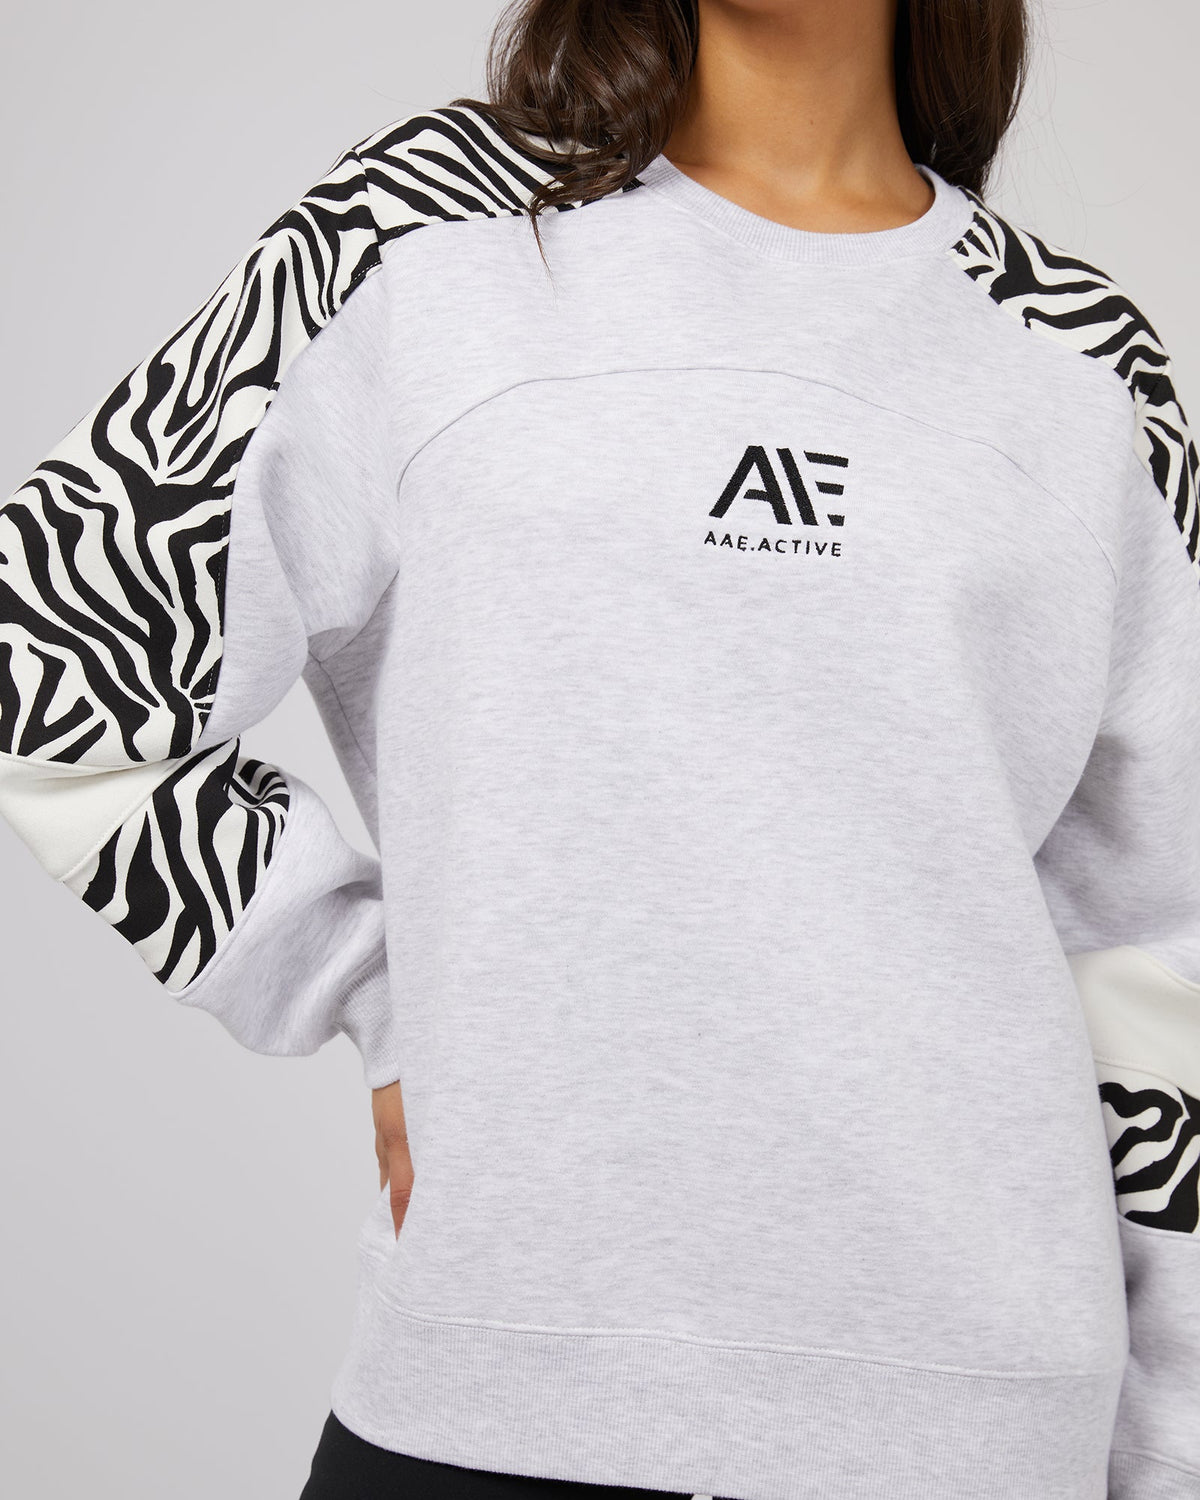 All About Eve-Parker Panelled Crew Snow Marle-Edge Clothing